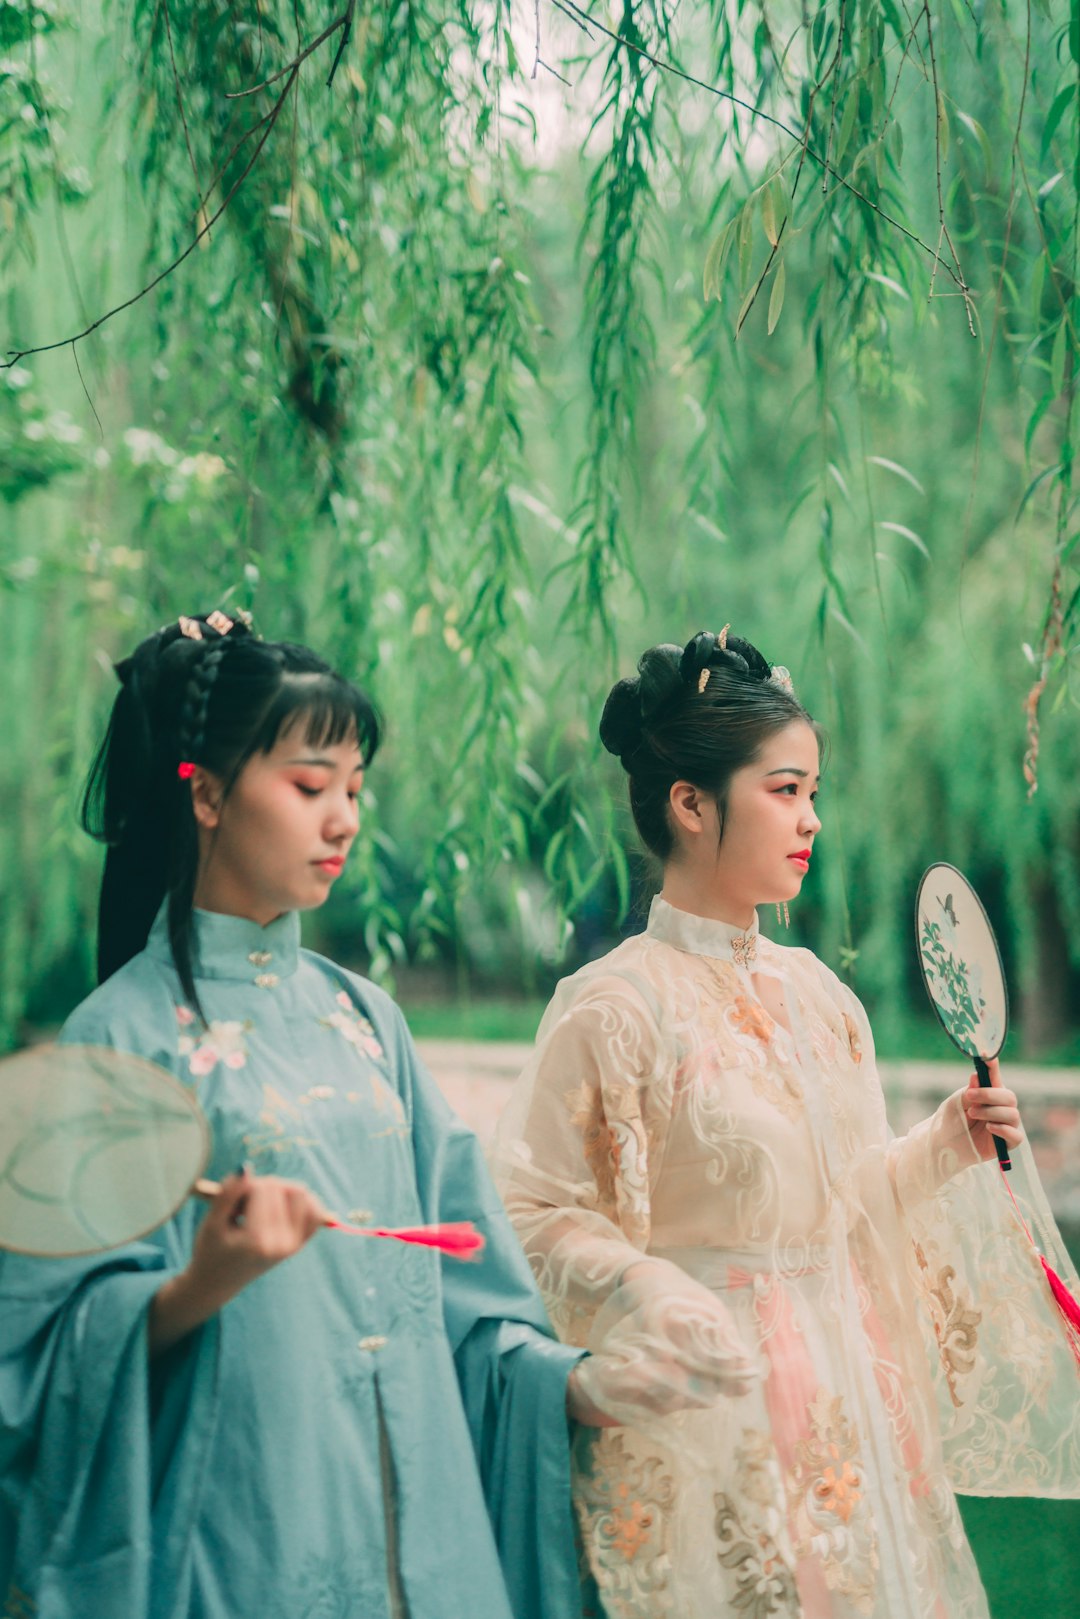 two women wearing traditional dresses beside trees during daytime